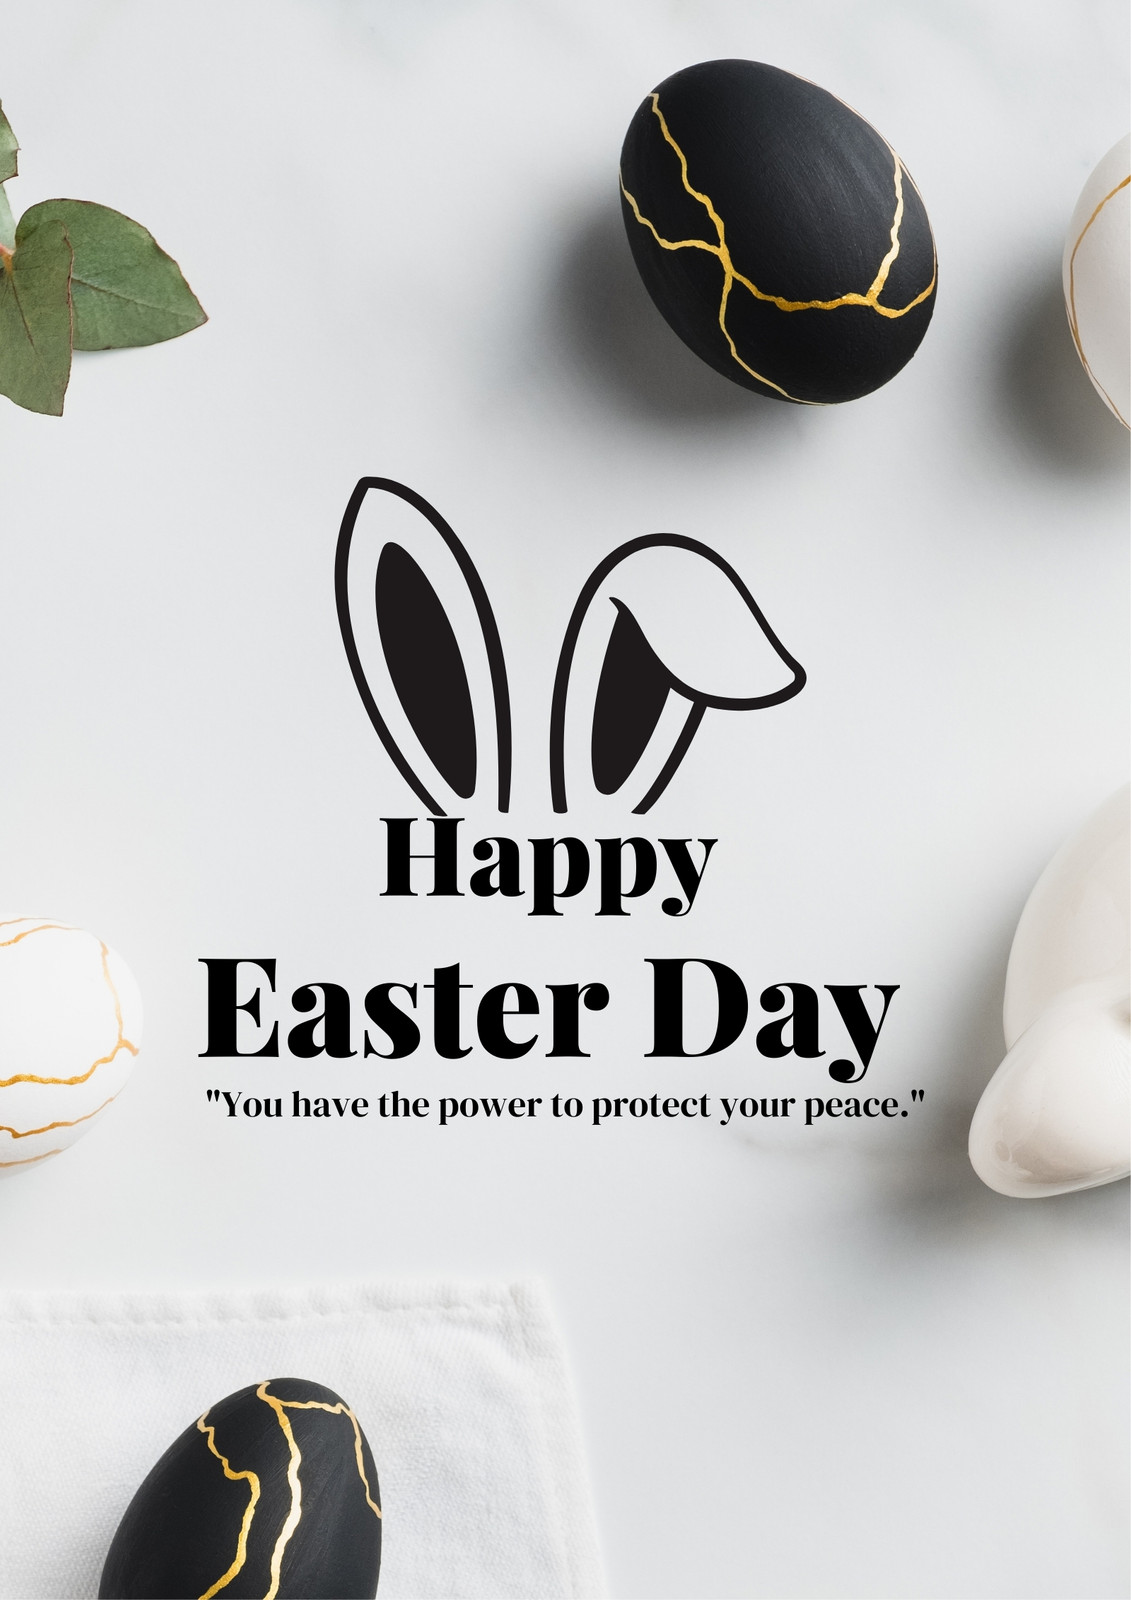 Page 13 - Free customizable, printable Easter poster templates | Canva